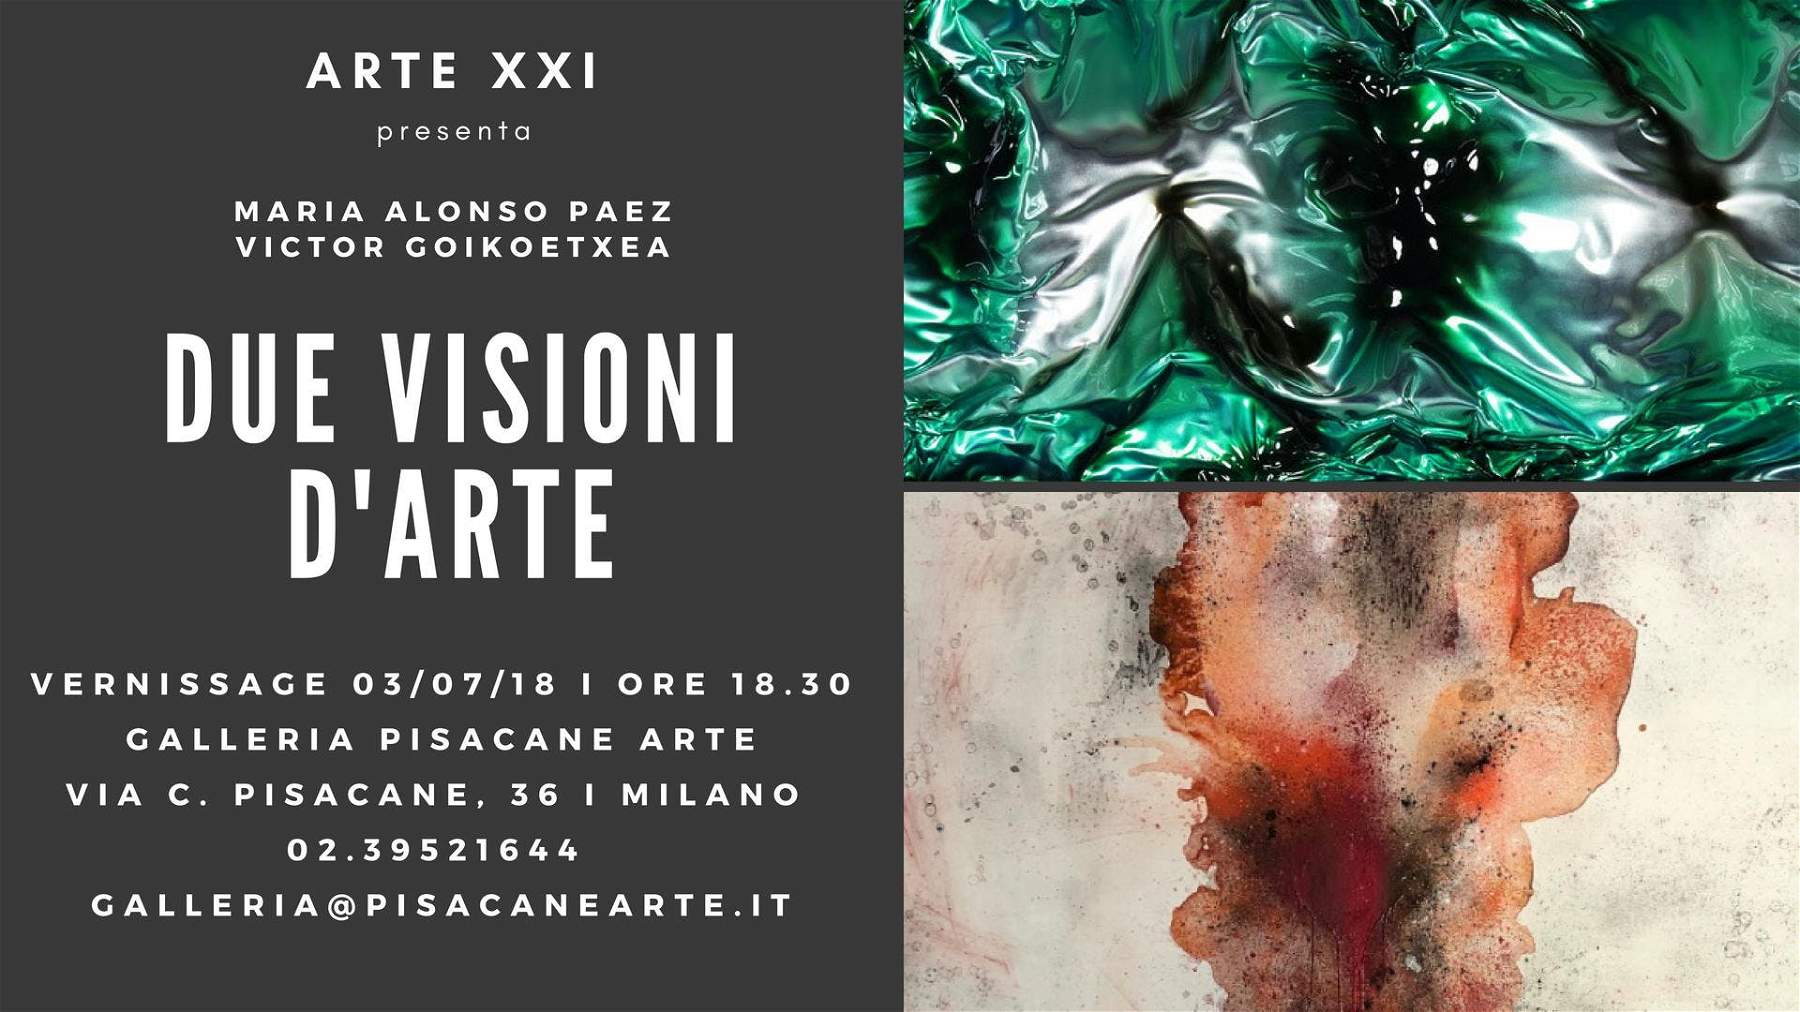 A double solo exhibition of Maria Alonso Paez and Victor Goikoetxea in Milan.